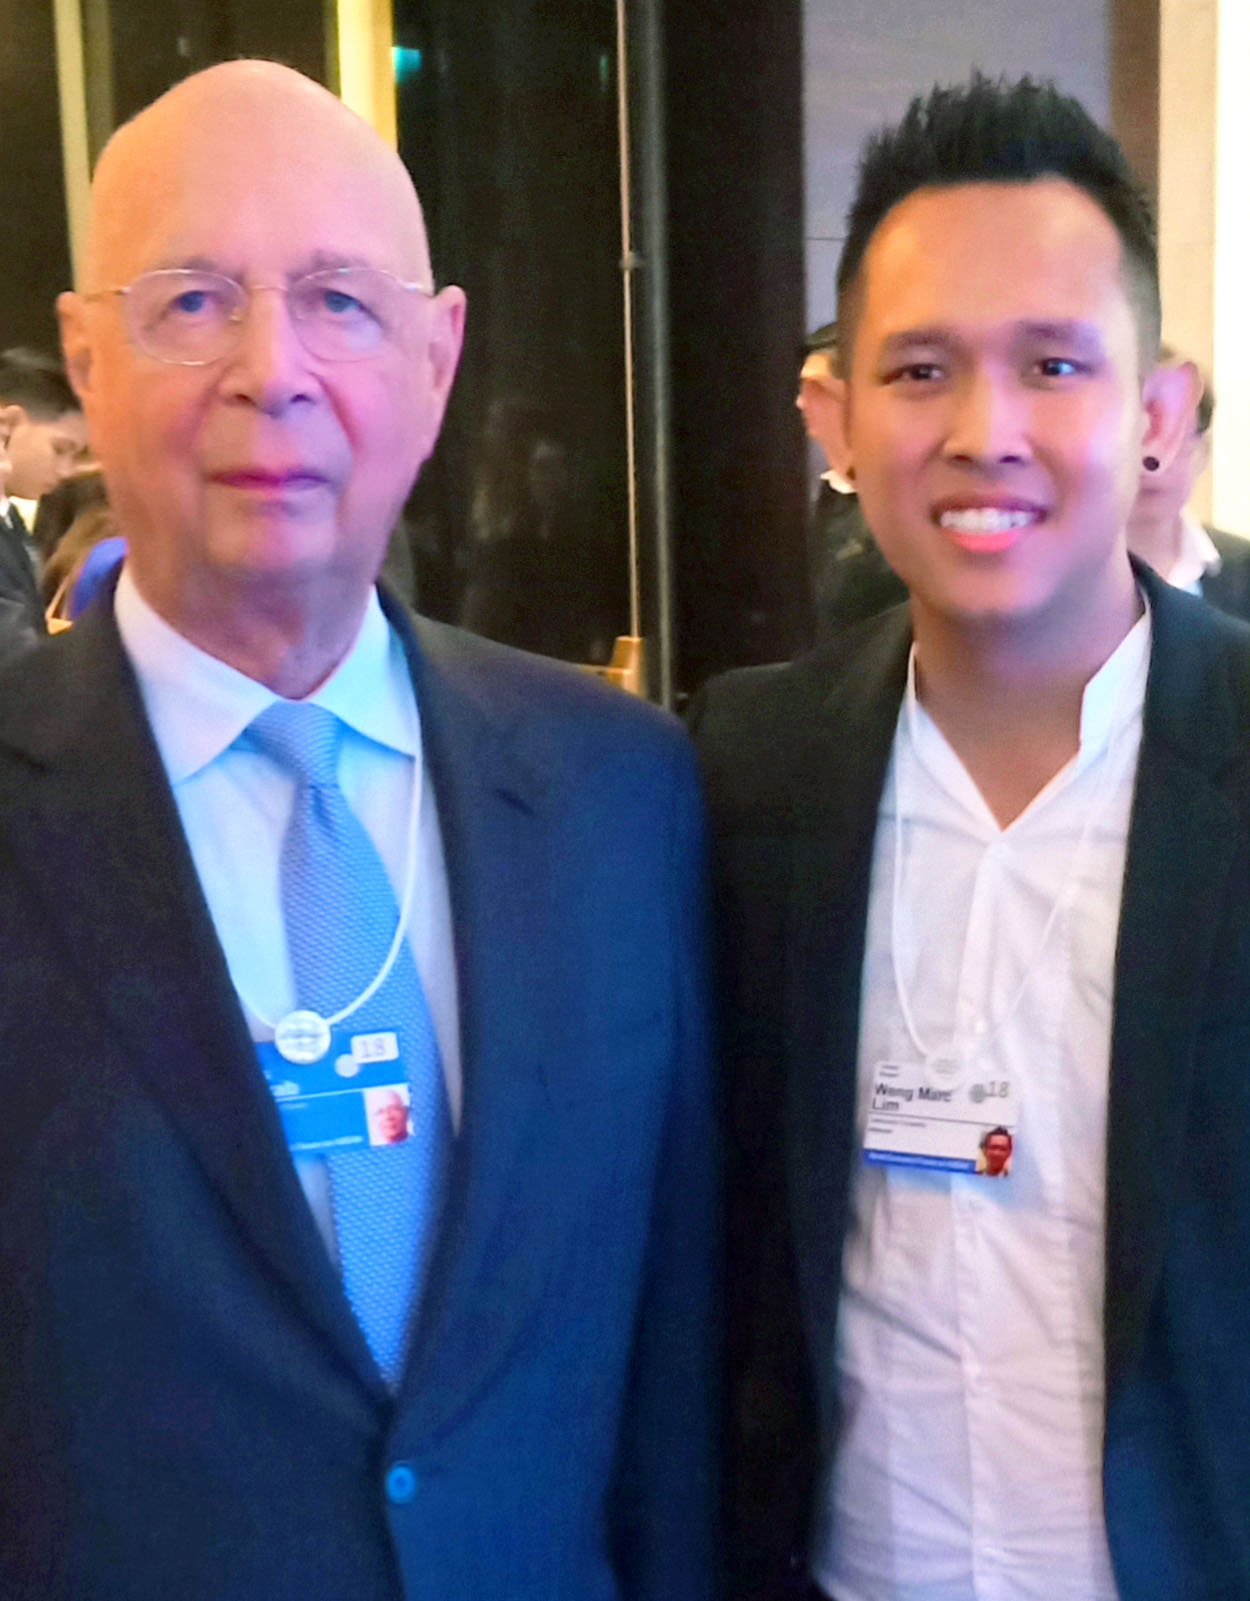 Dr Lim (right) with Founder and Executive Chairman of the WEF Professor Klaus Schwab.